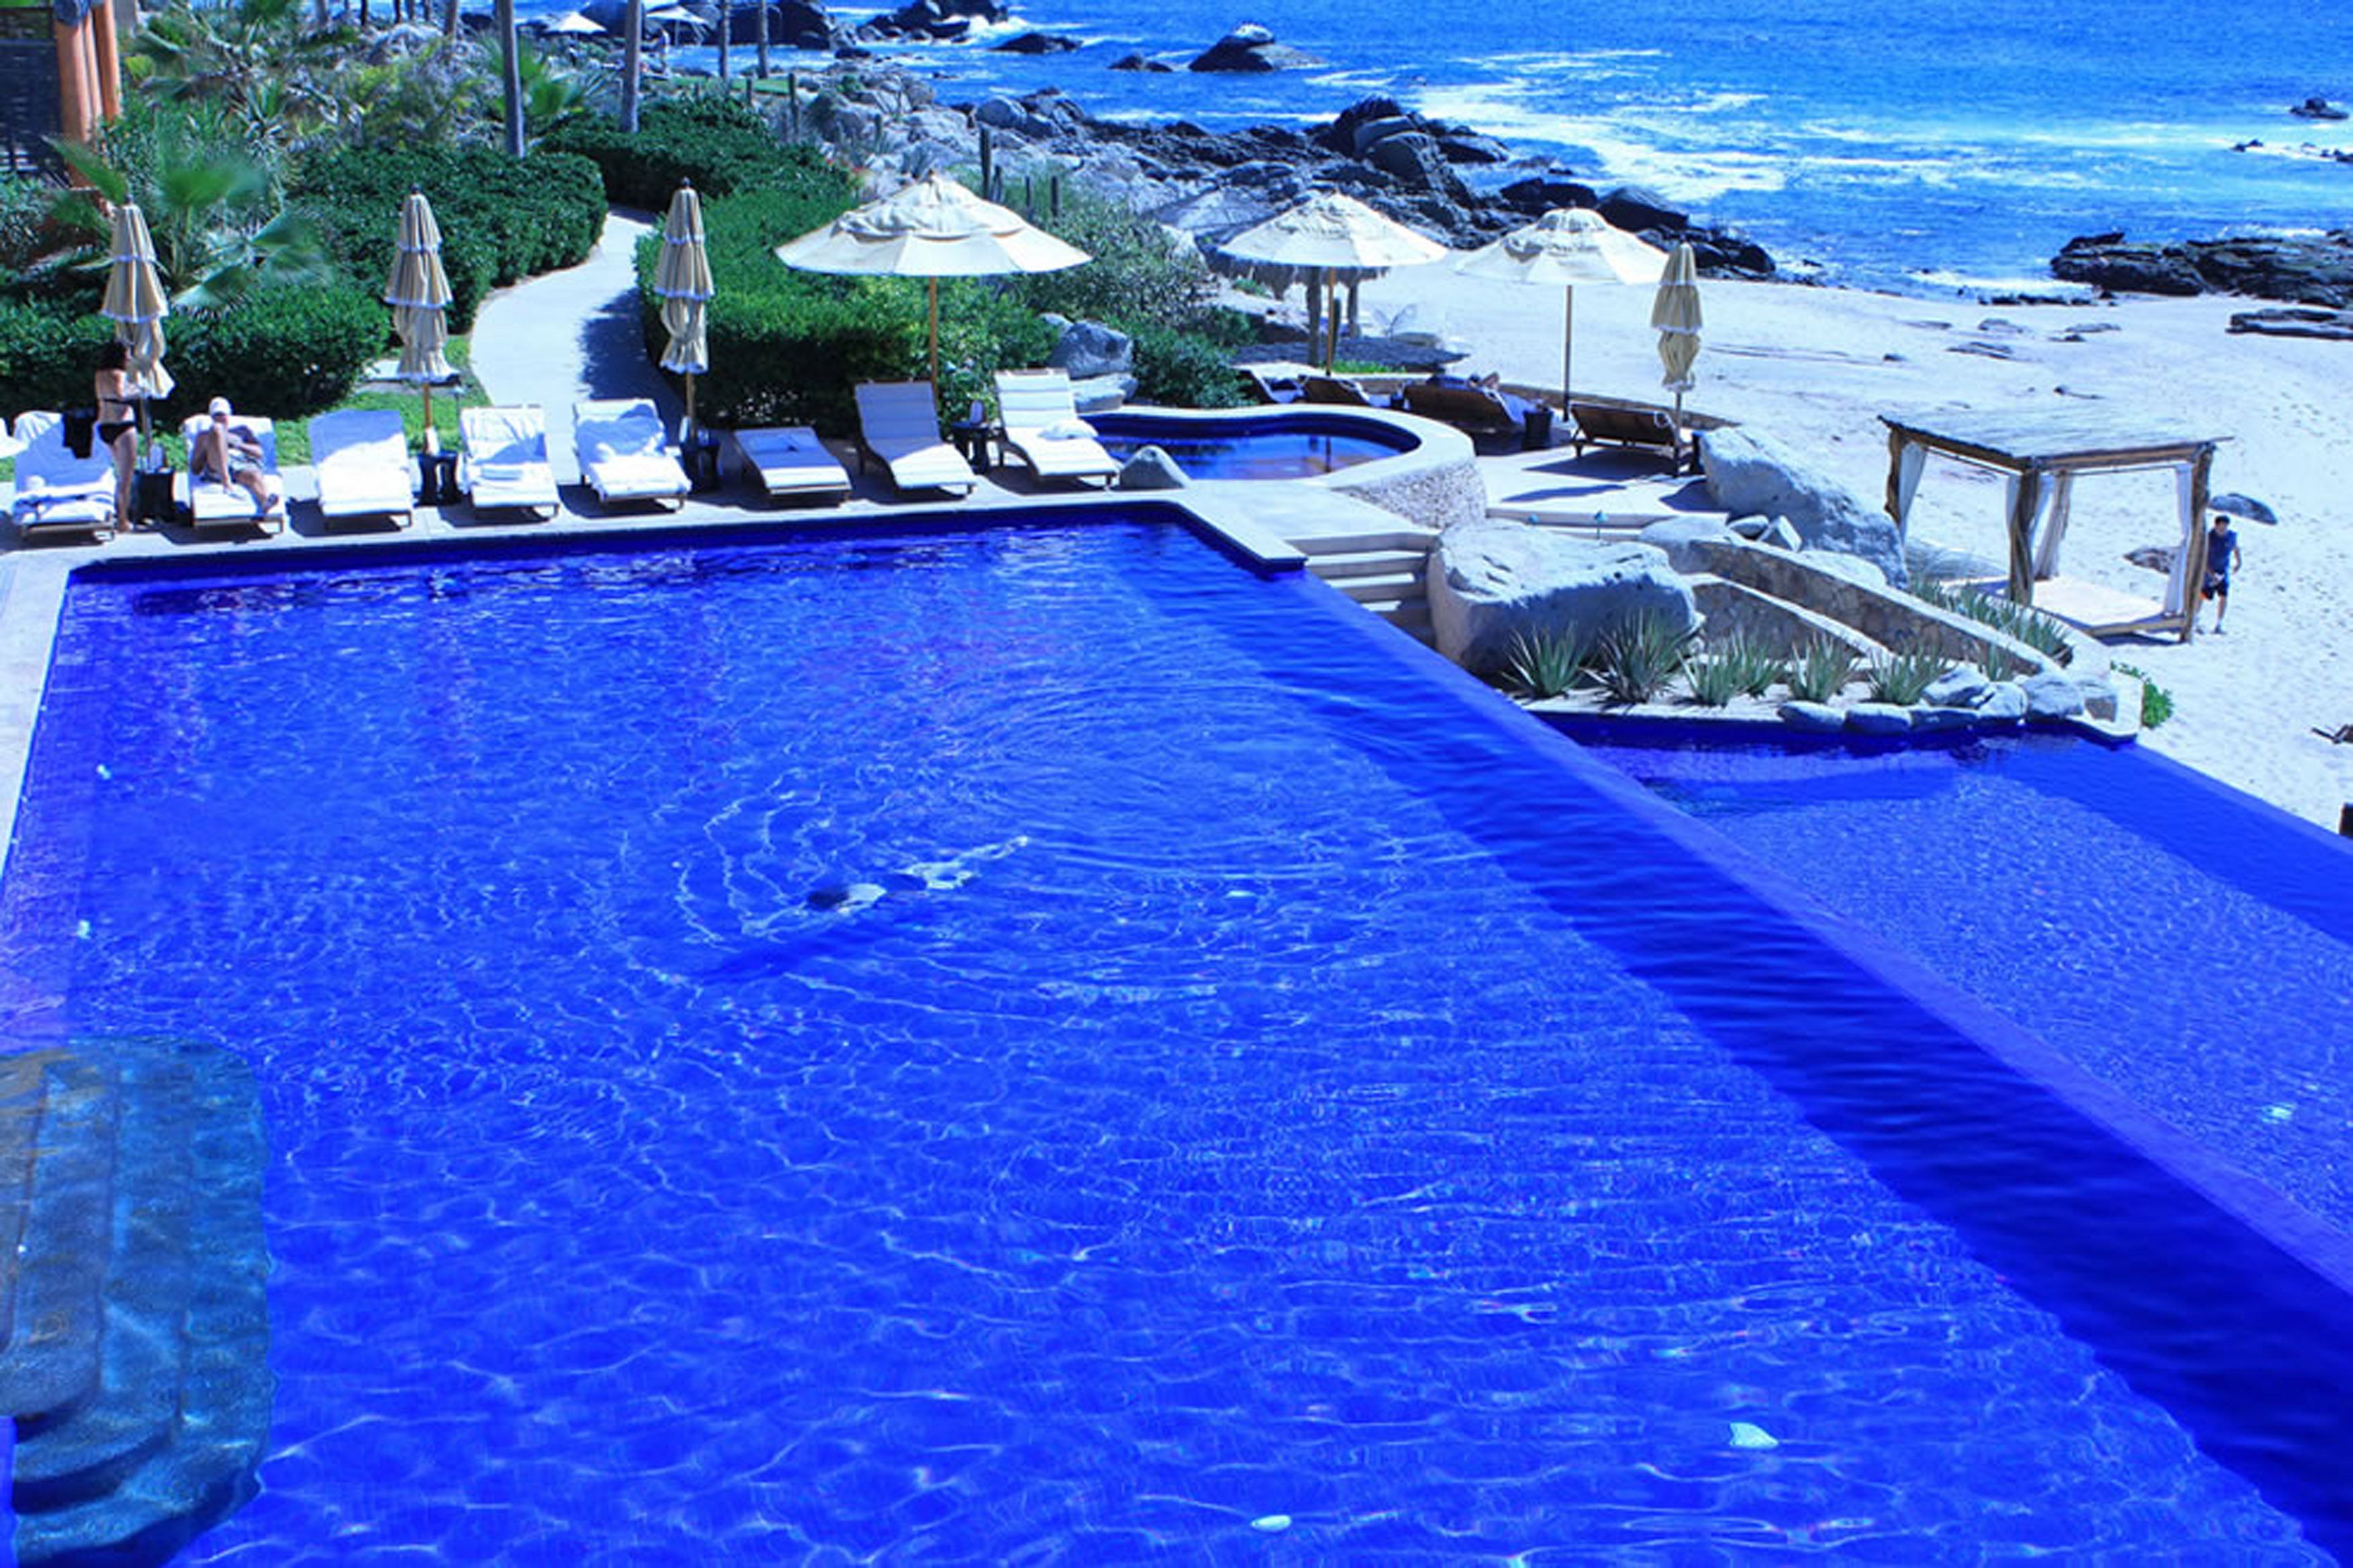 Romantic Infinity Pool Design At Hotel Esperanza Hotels With Infinity Pools (View 21 of 39)